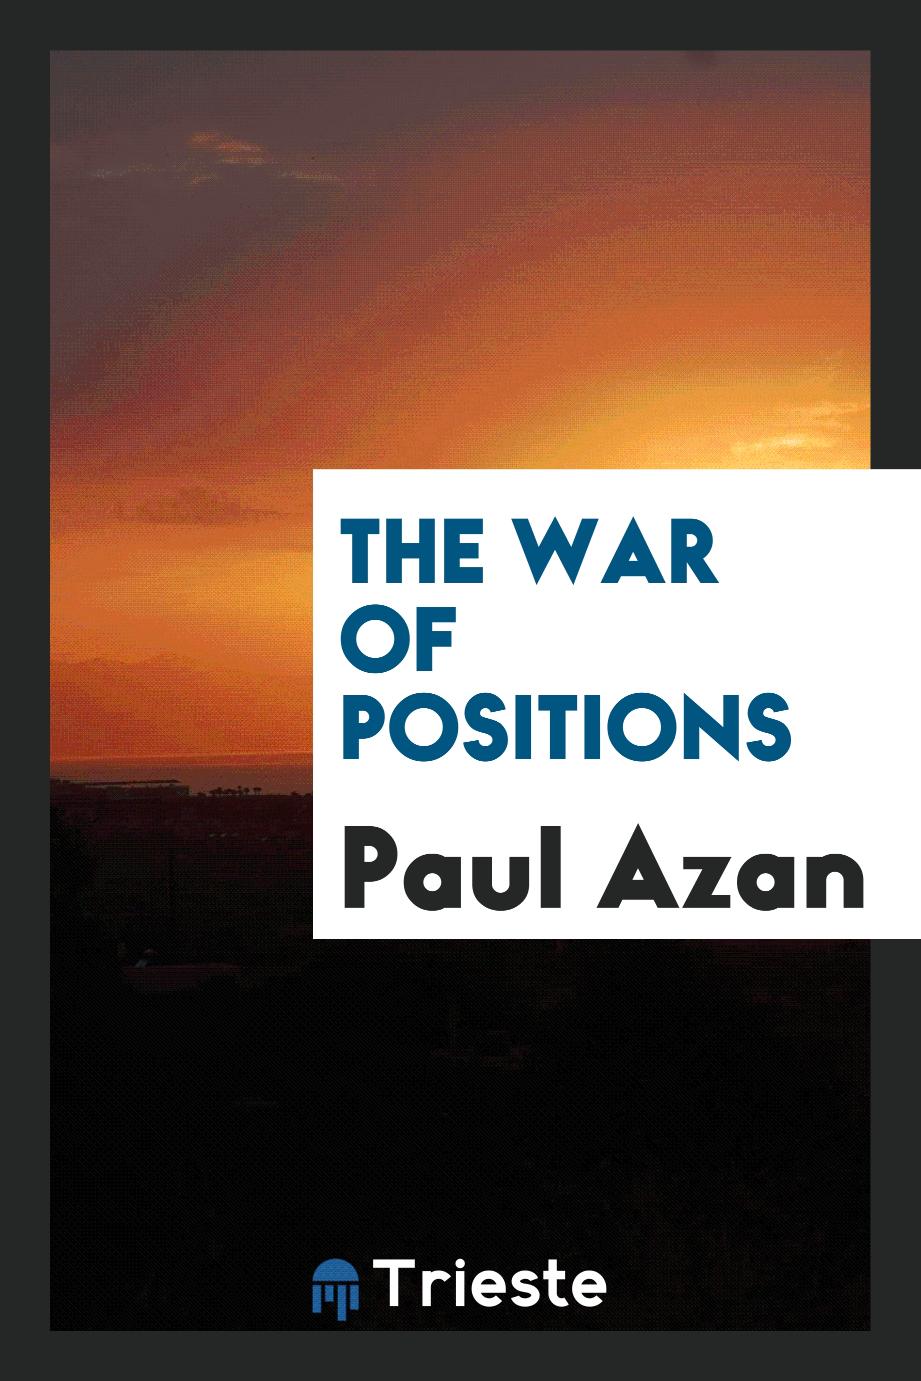 The war of positions